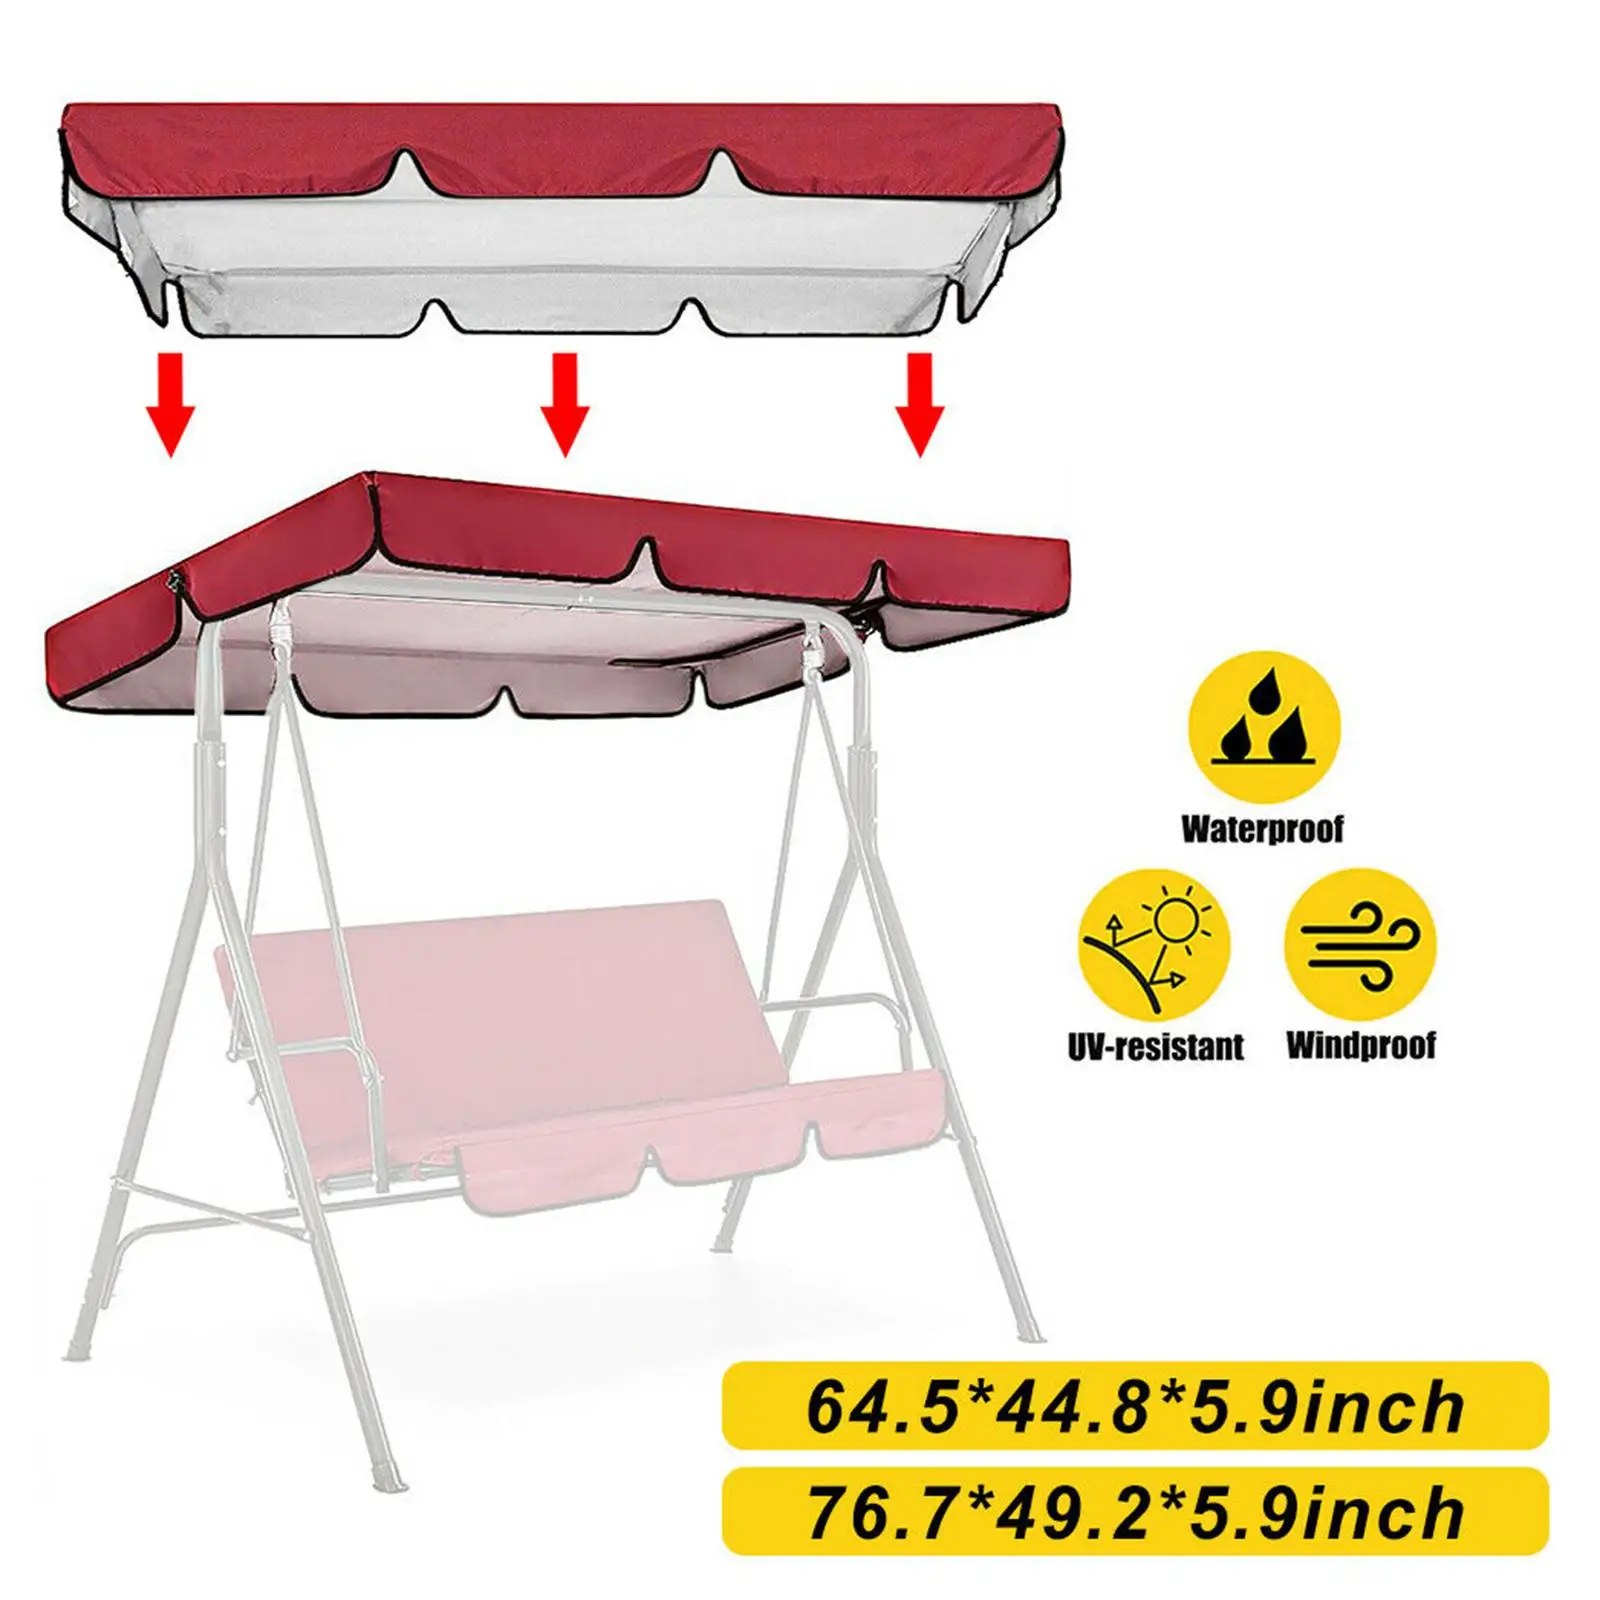 Garden Patio 3 Seat  Cover Waterproof Outdoor Furniture Garden  Awning  Cover